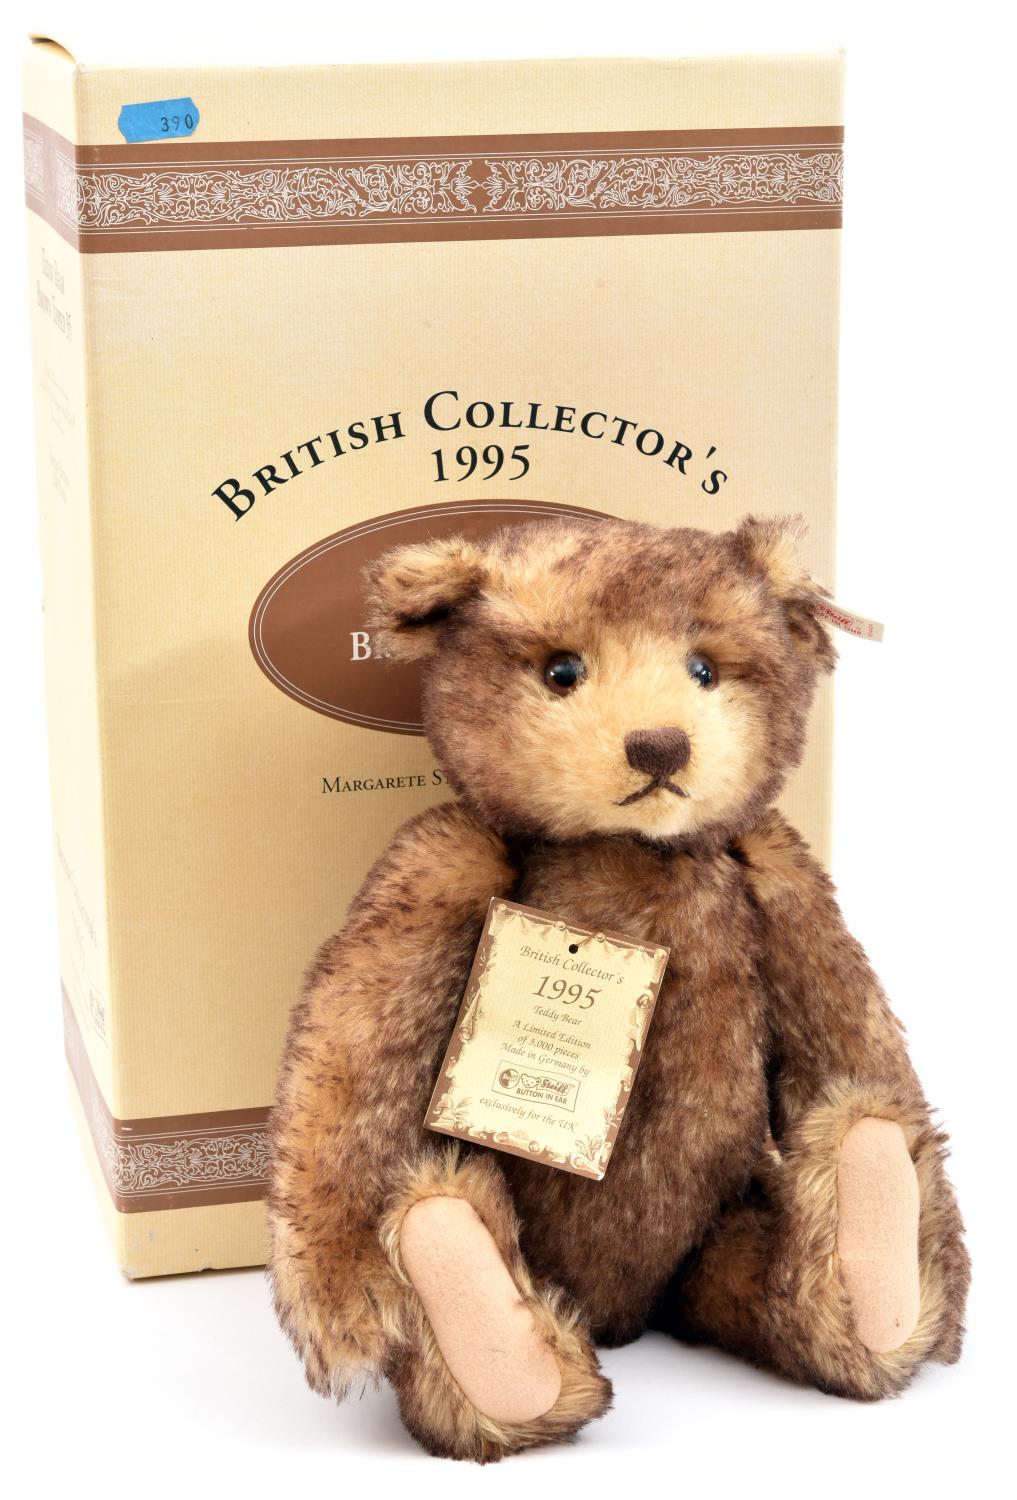 3 Steiff British Collector's 1995 Teddy Bear Brown Tipped 35. (654404). Based on the 1920's patterns